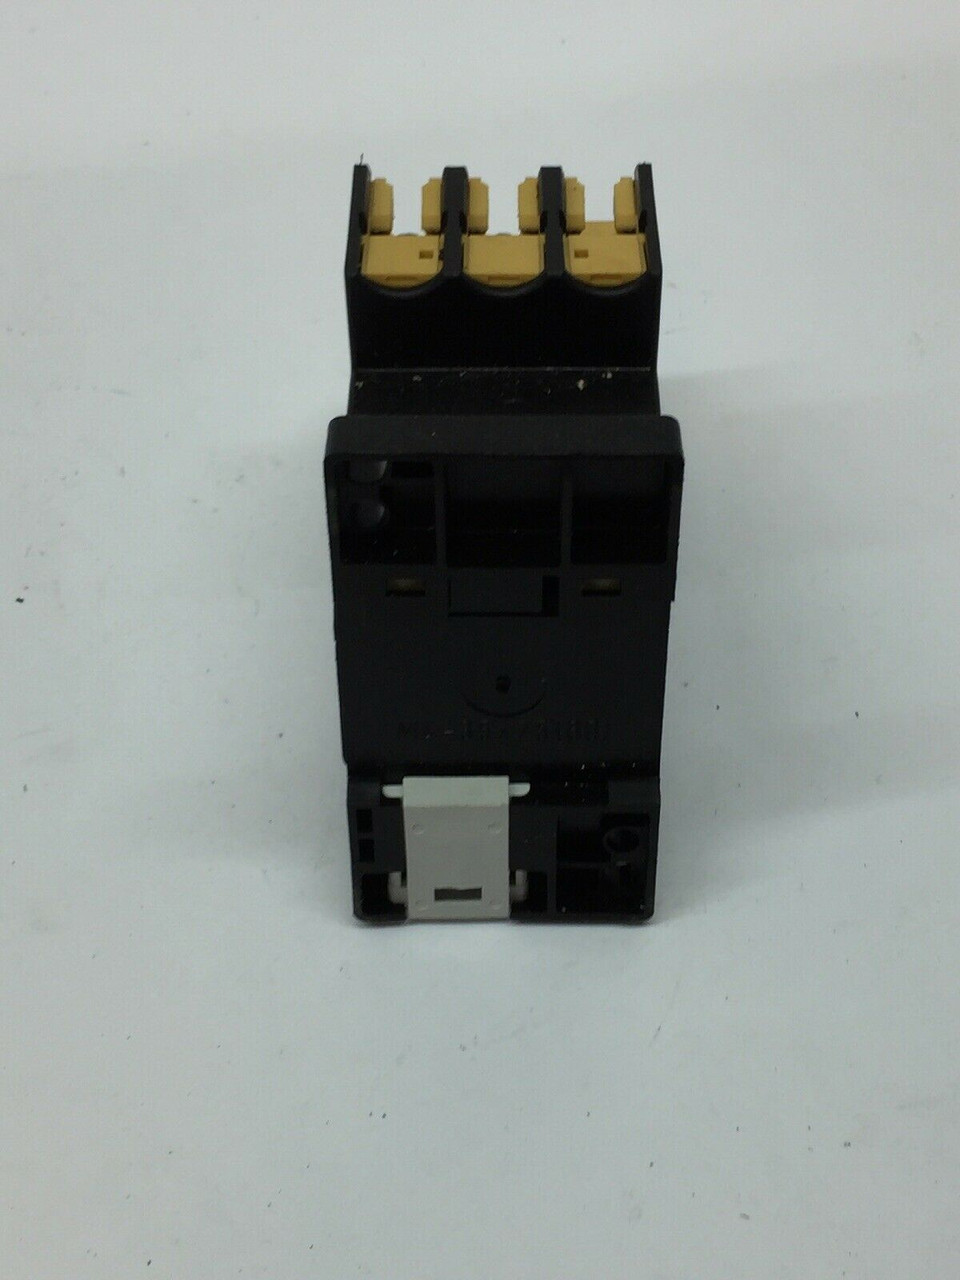 Thermal Relay 193-BSB12 Allen Bradley with 193-BPM1 SER C Base Mounting Adapter